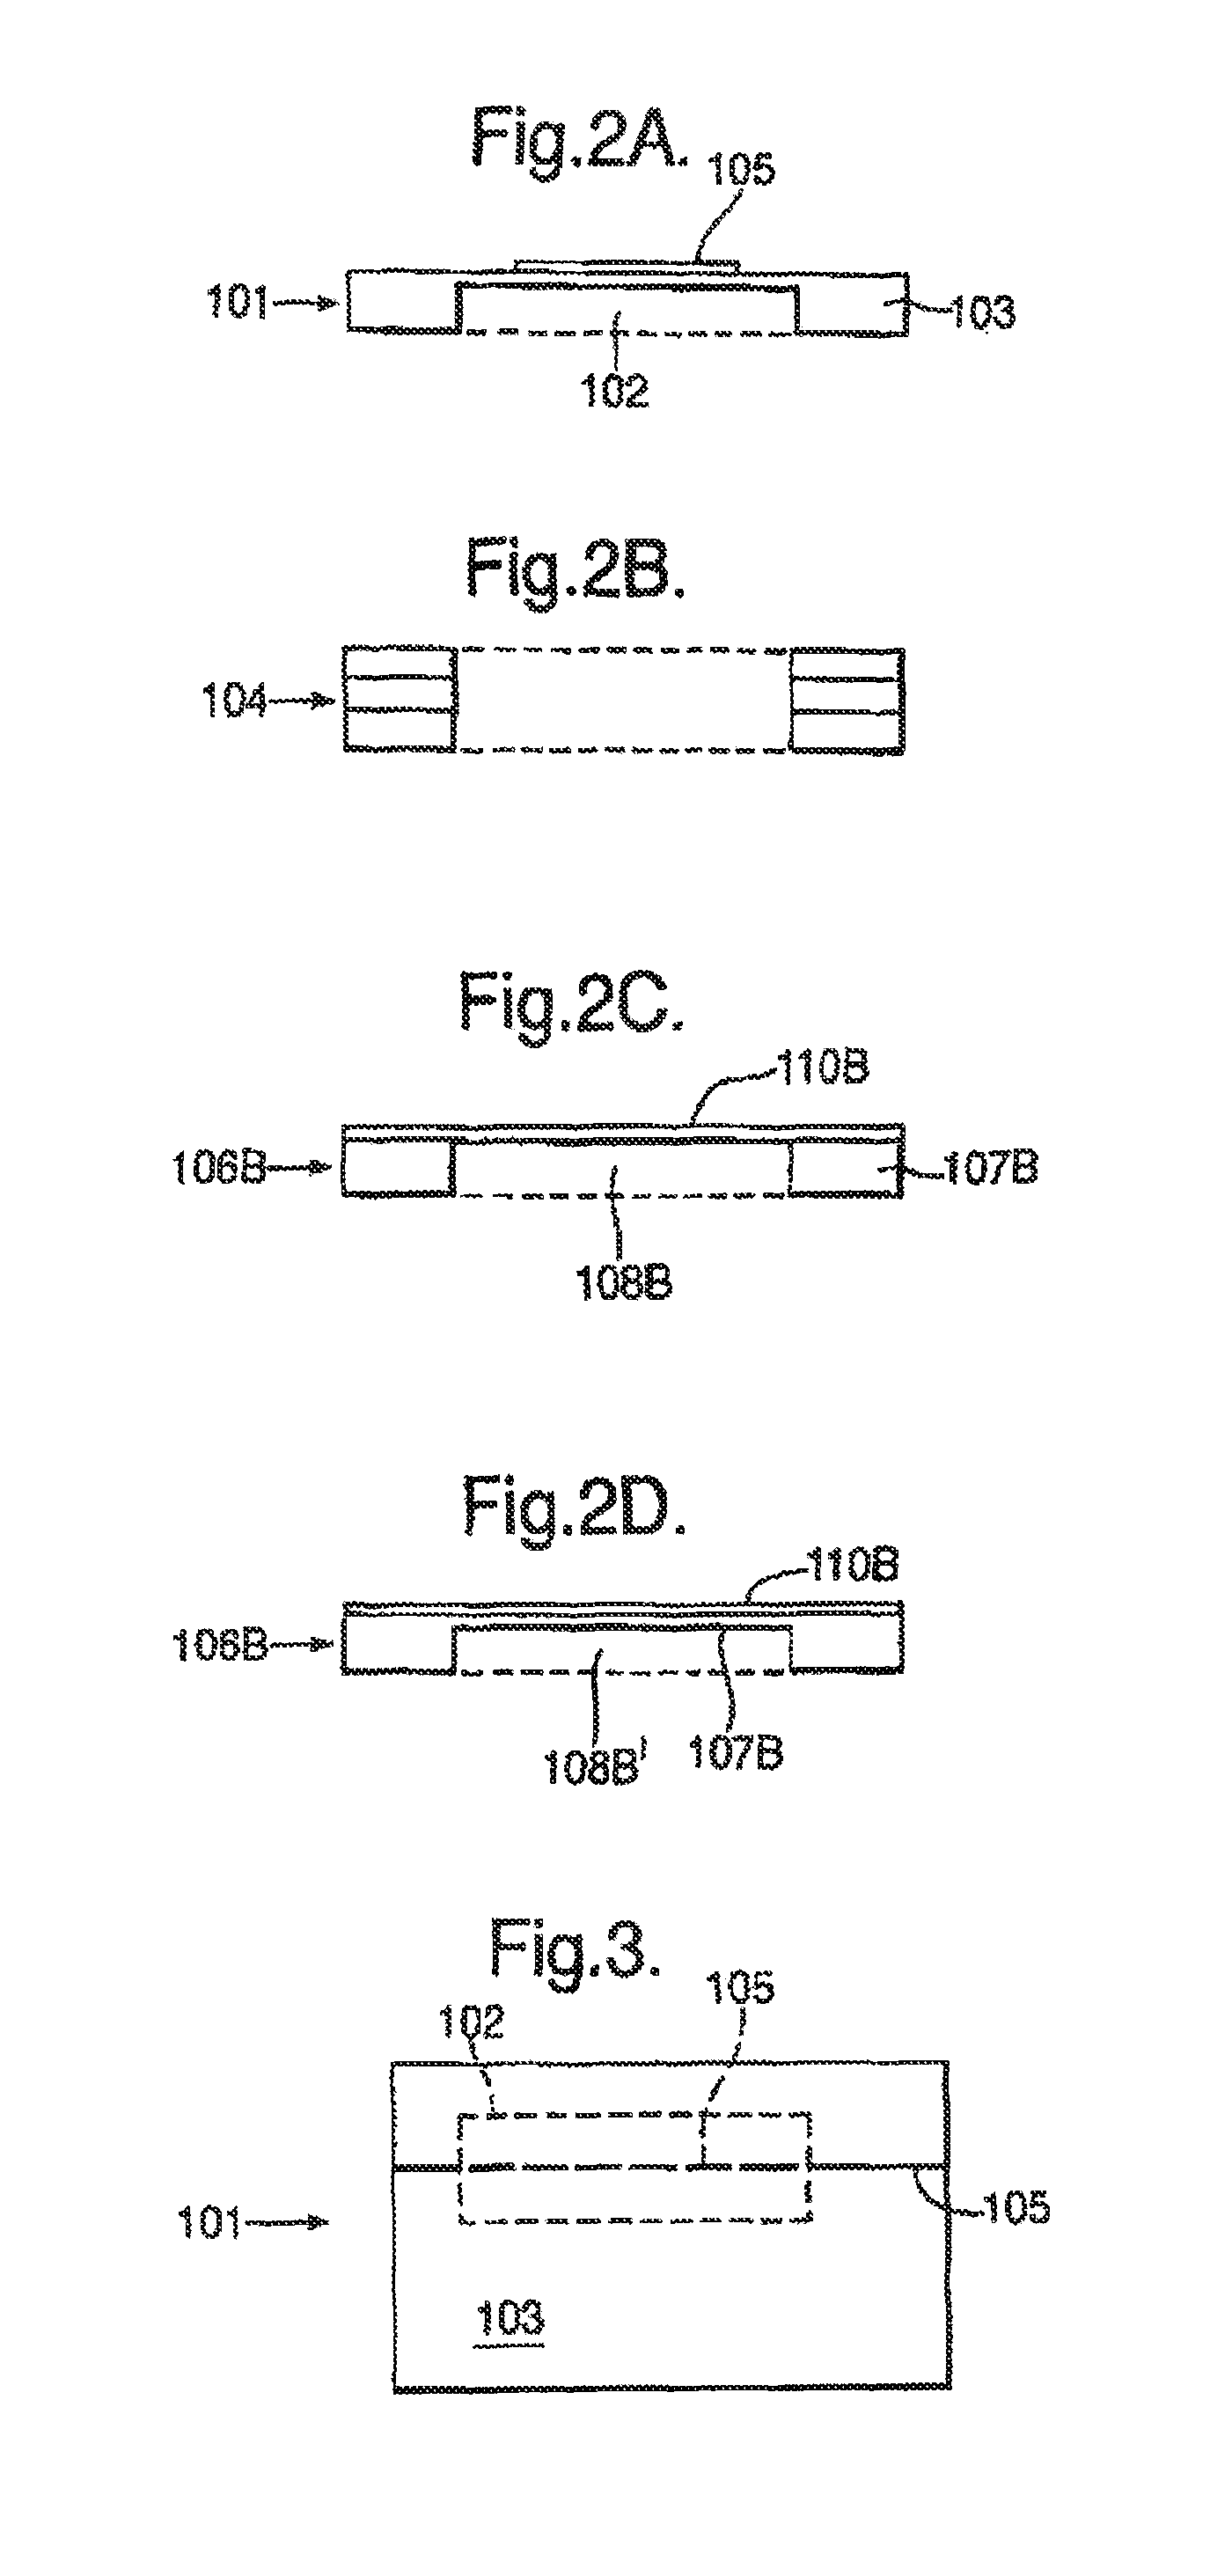 Microwave circuit assembly comprising a microwave component suspended in a gas or vacuum region